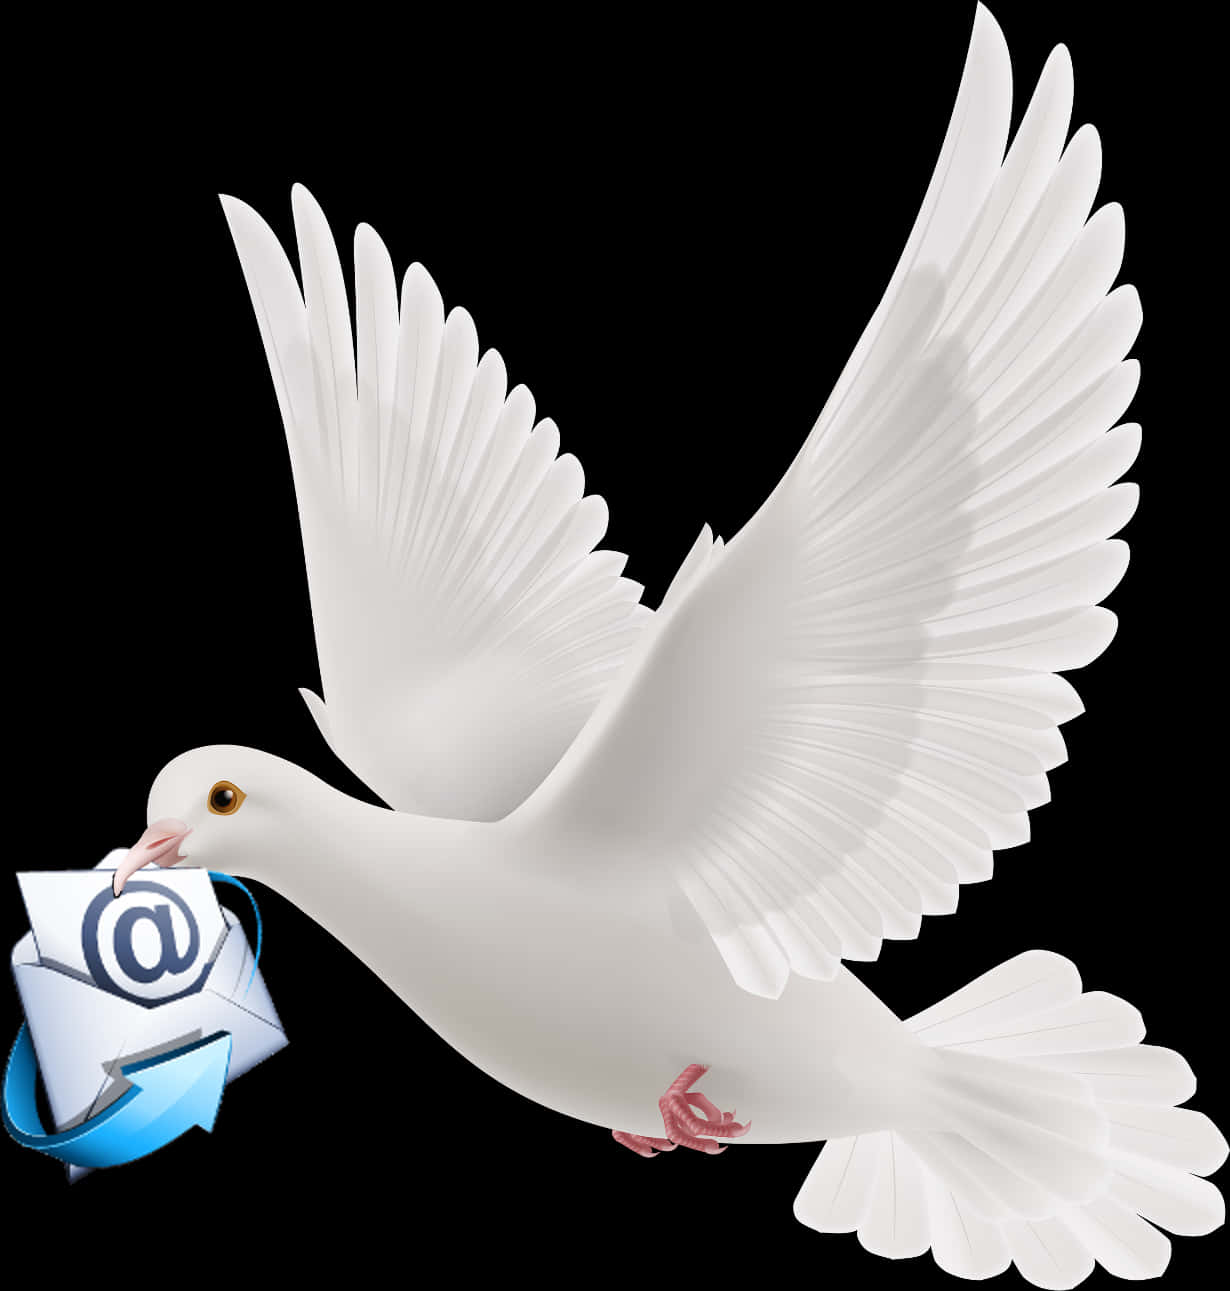 A White Dove Carrying An Envelope